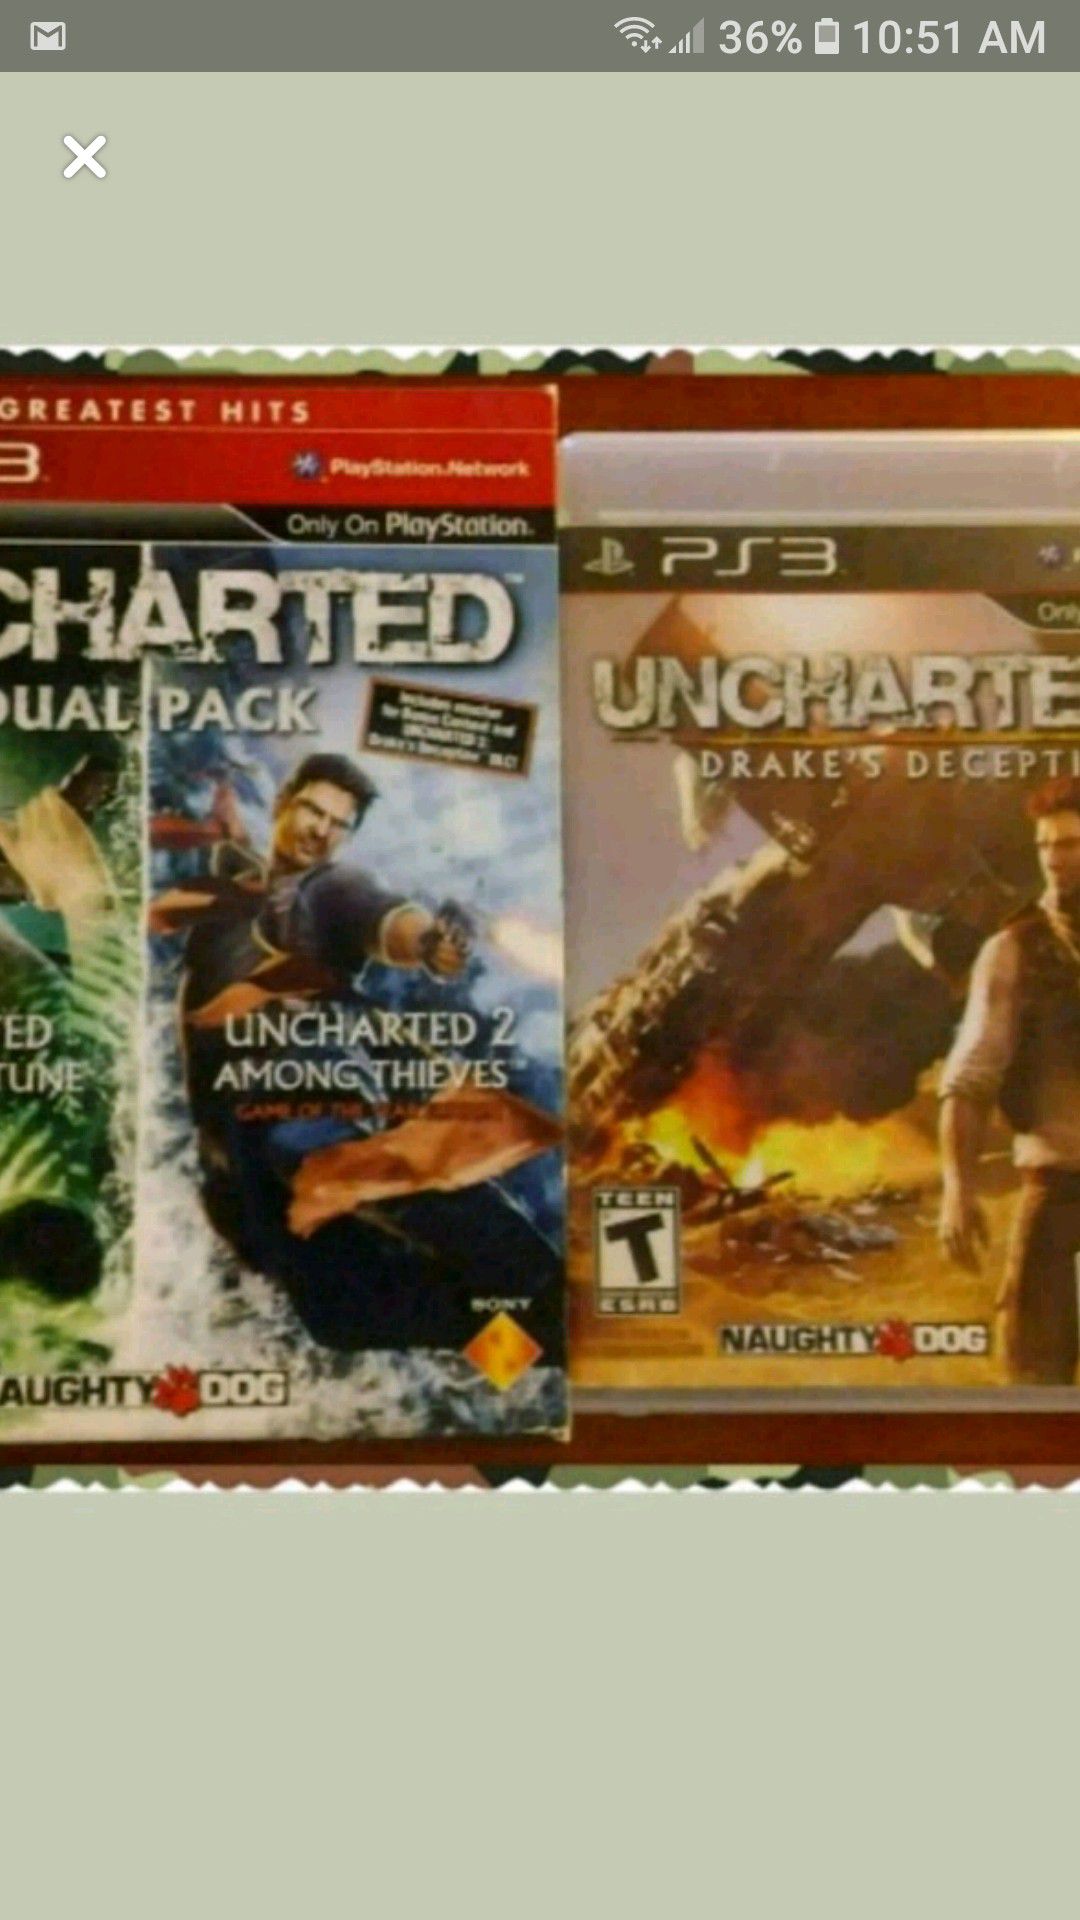 (2) Unchartered PS3 games